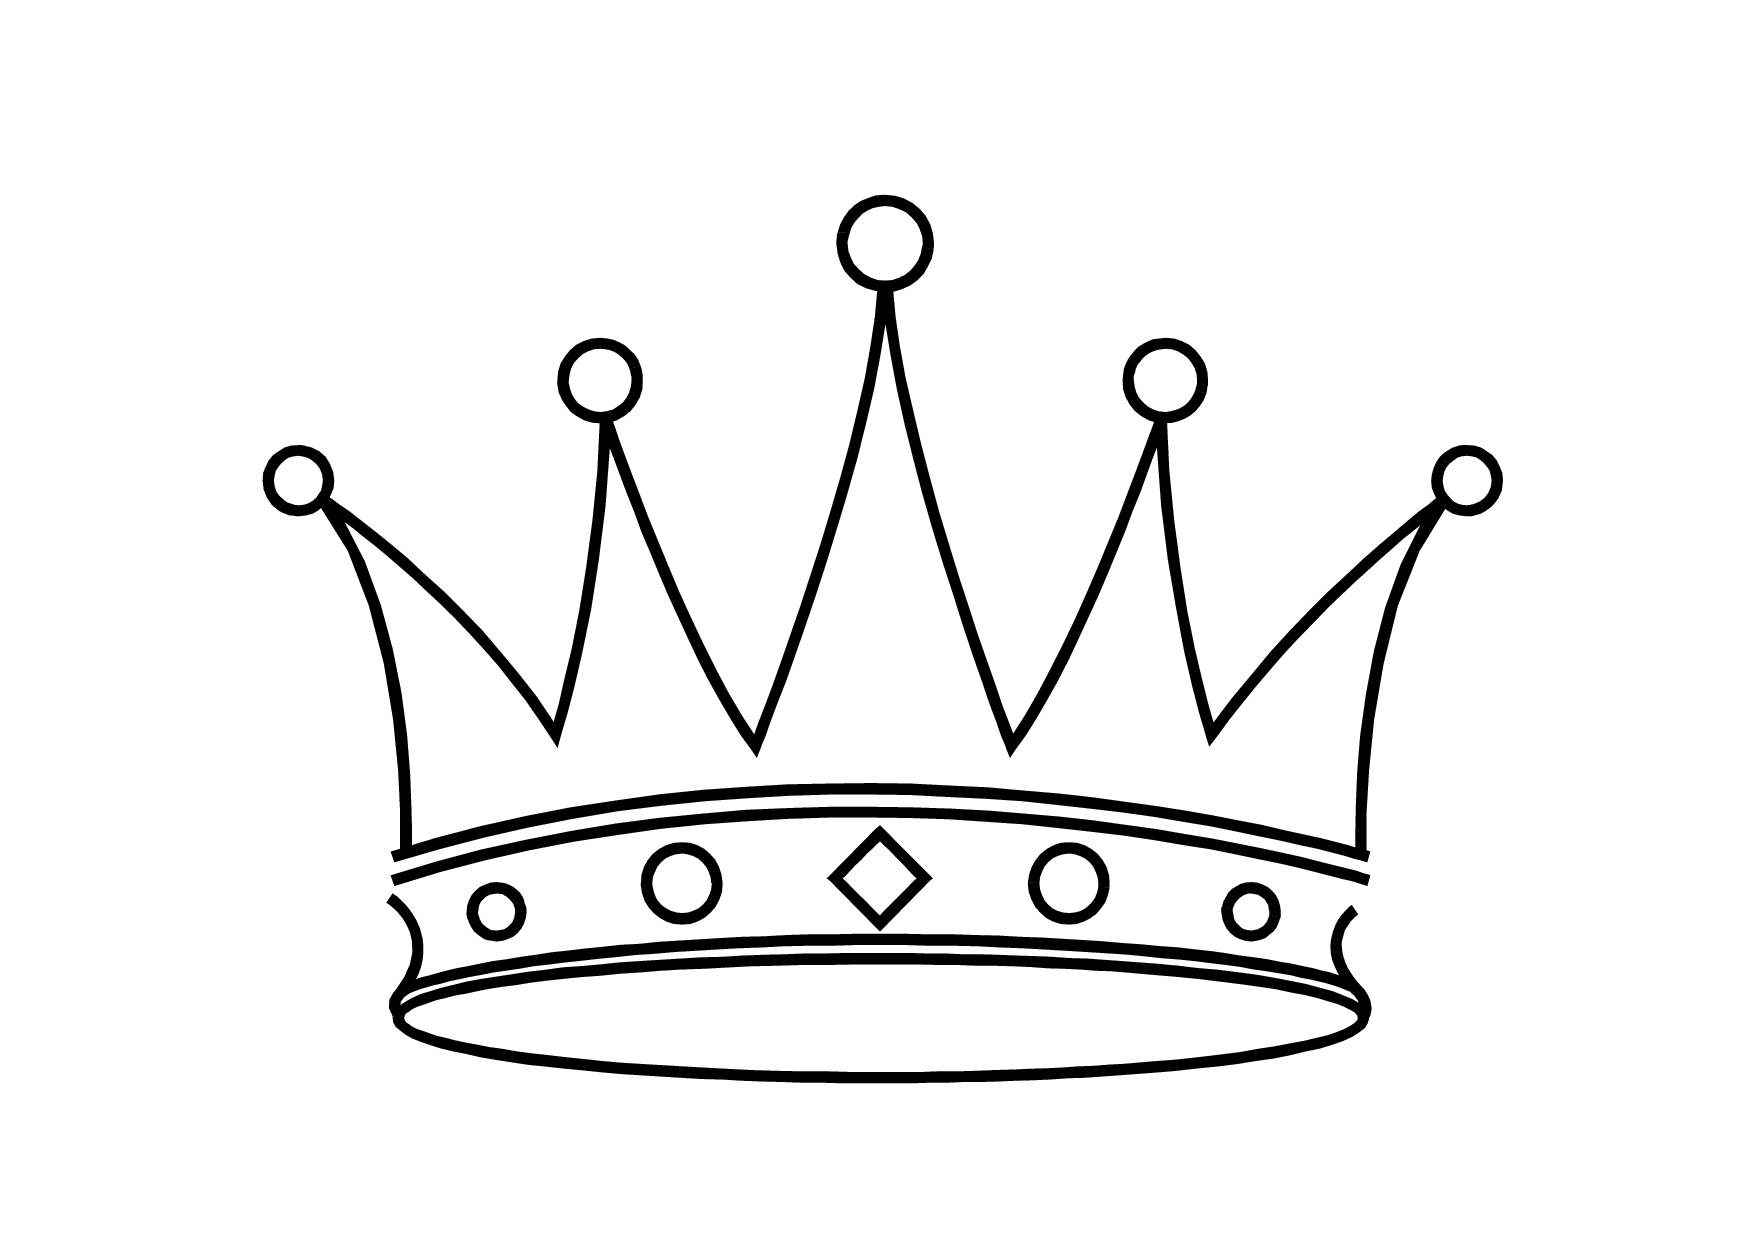 purim - crown with jewels coloring sheet